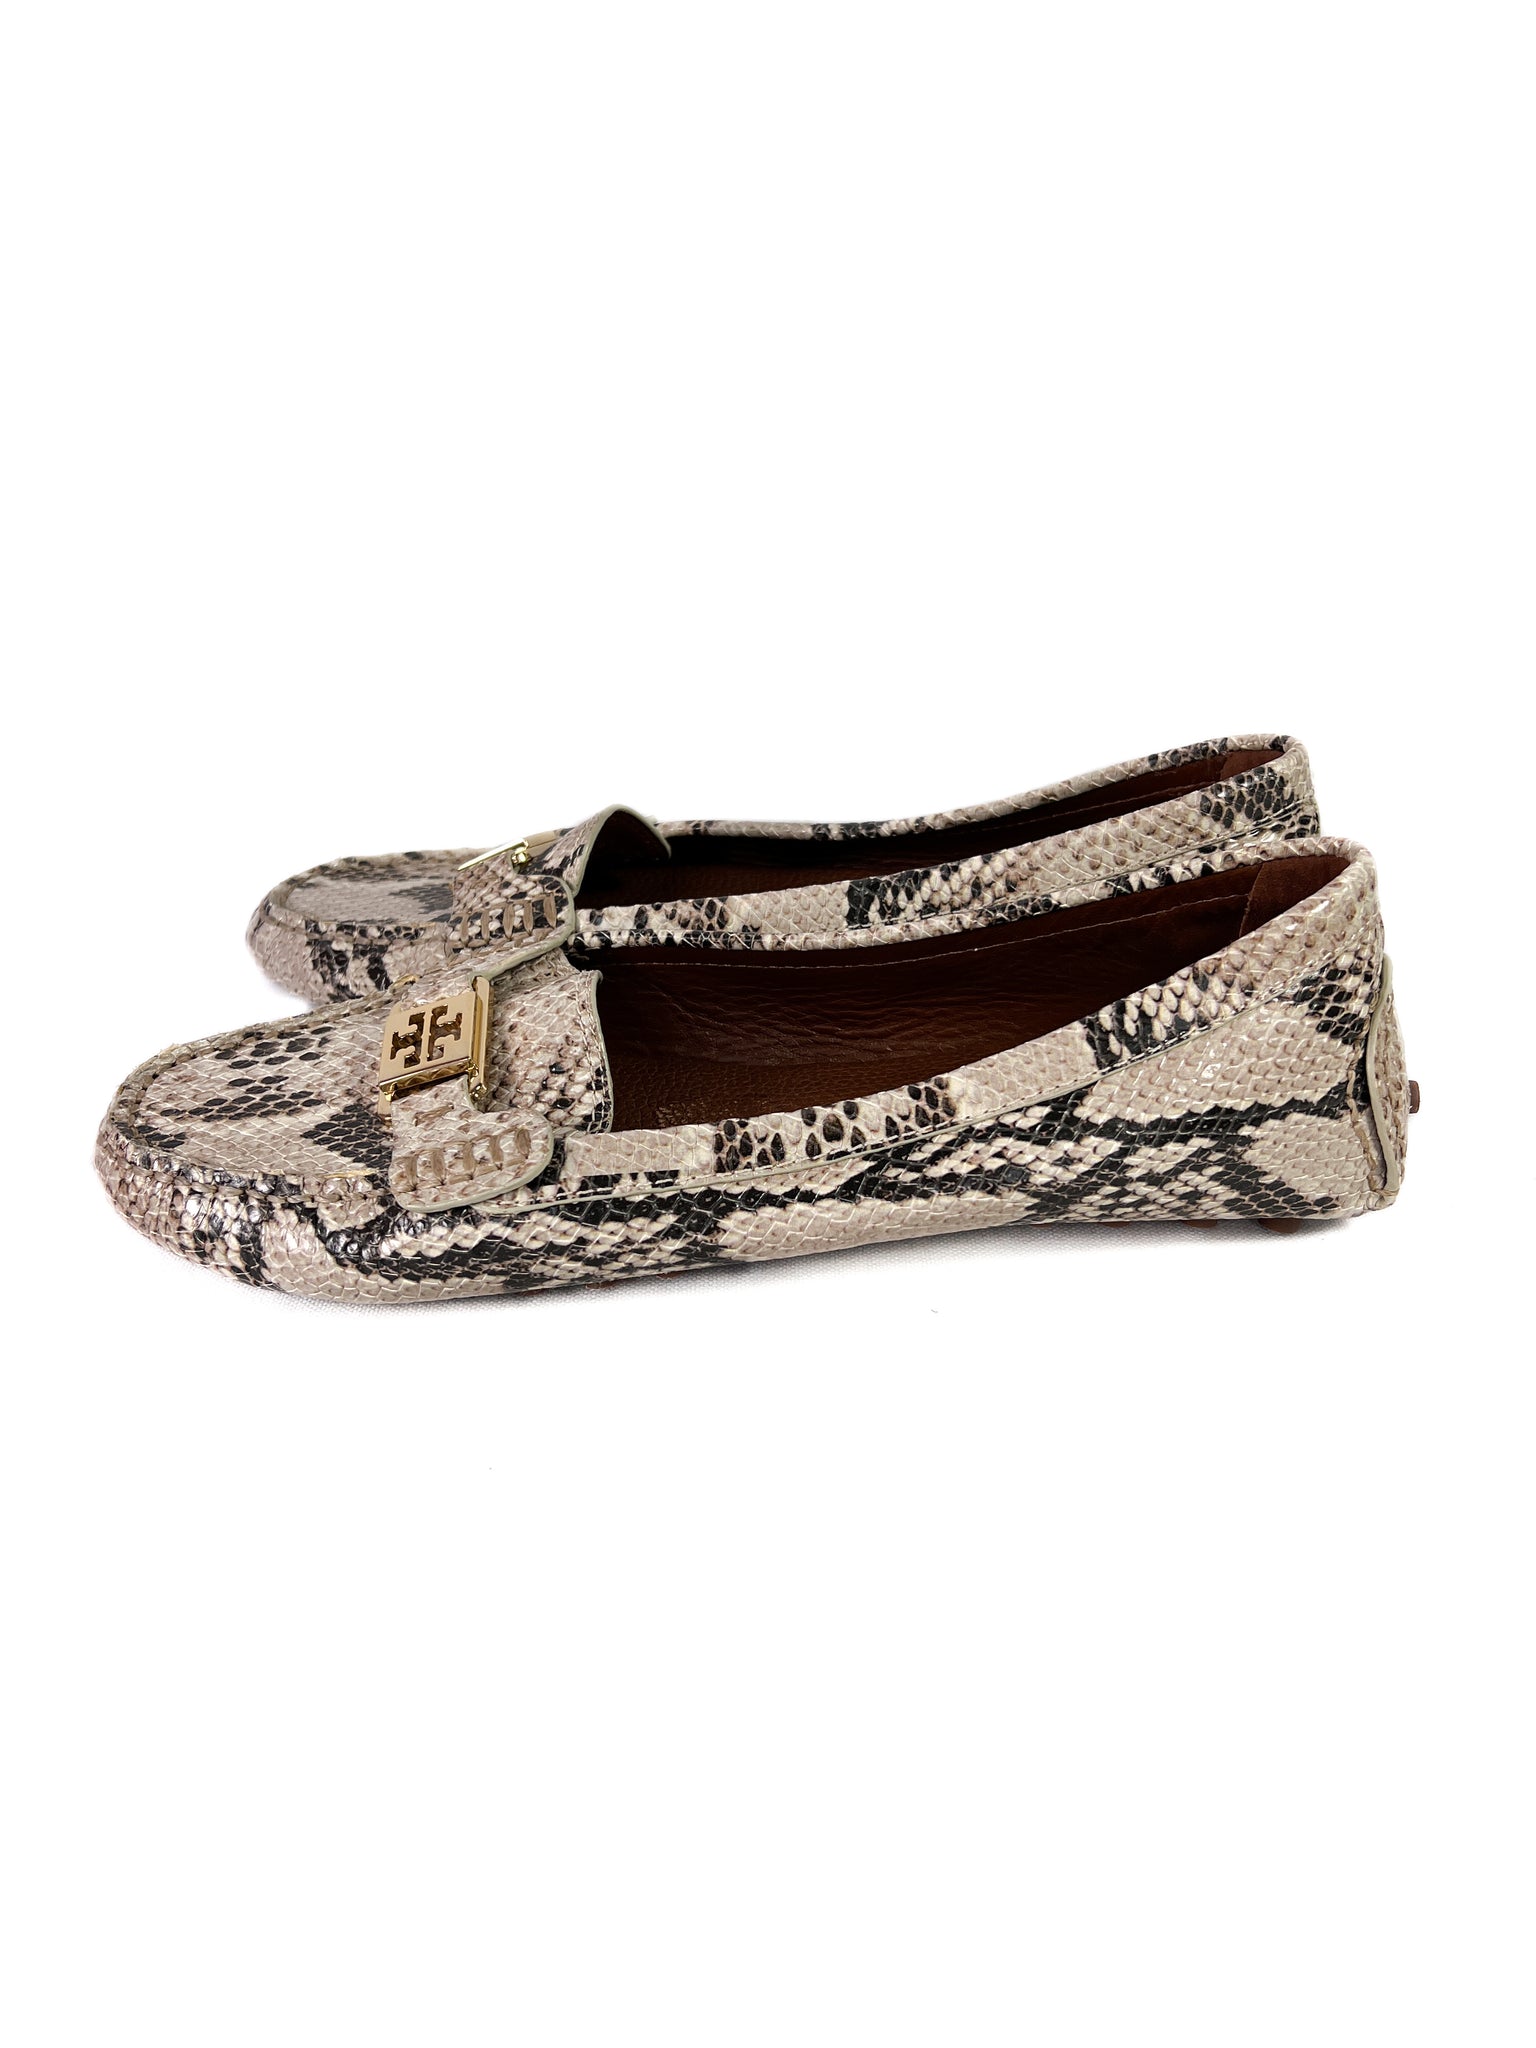 Tory Burch snake print leather loafers size  NEW **ONLINE ONLY** – My  Girlfriend's Wardrobe LLC